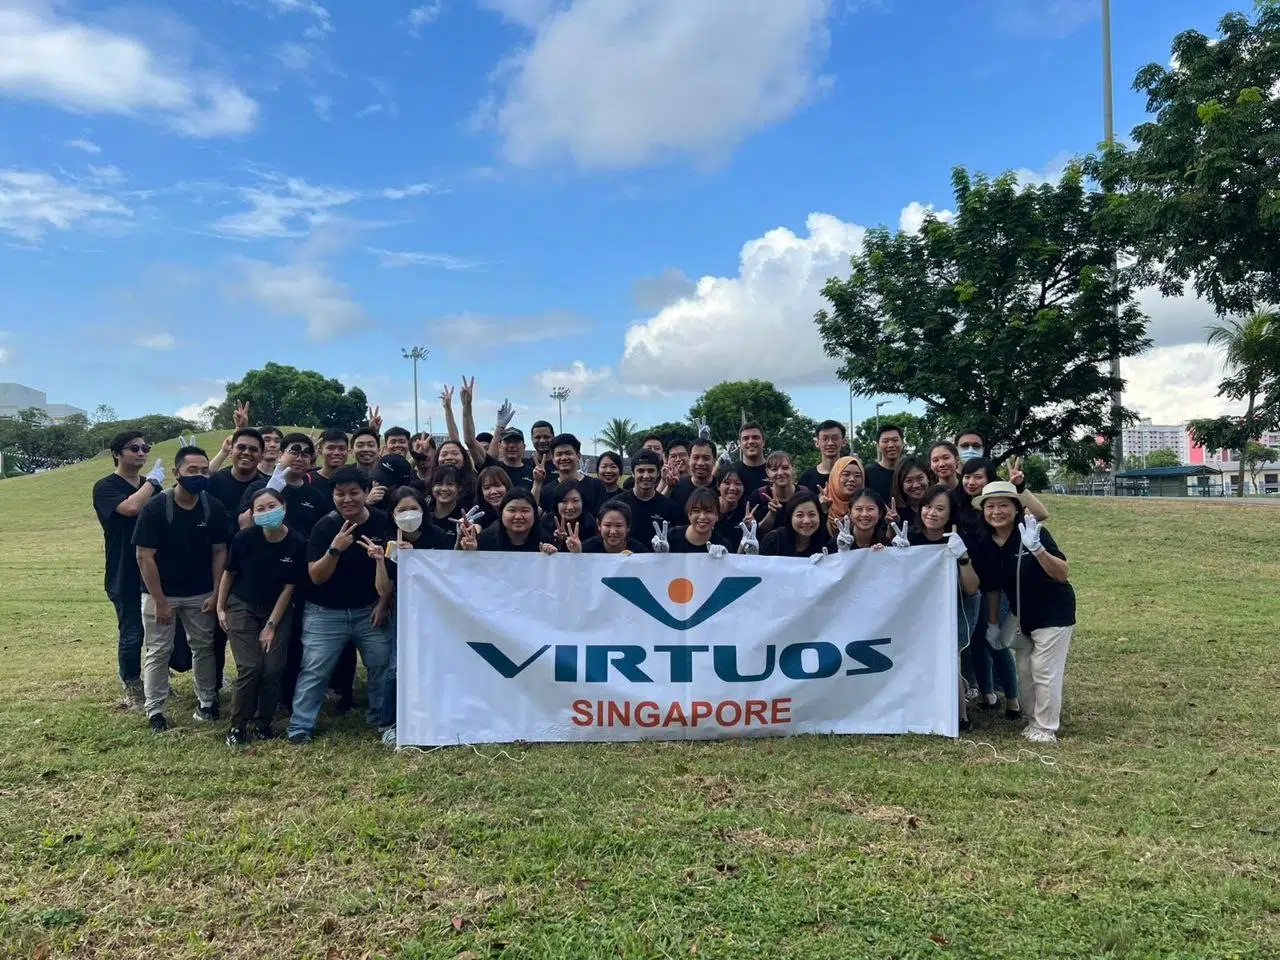 Our team in Singapore before setting out to plant trees 